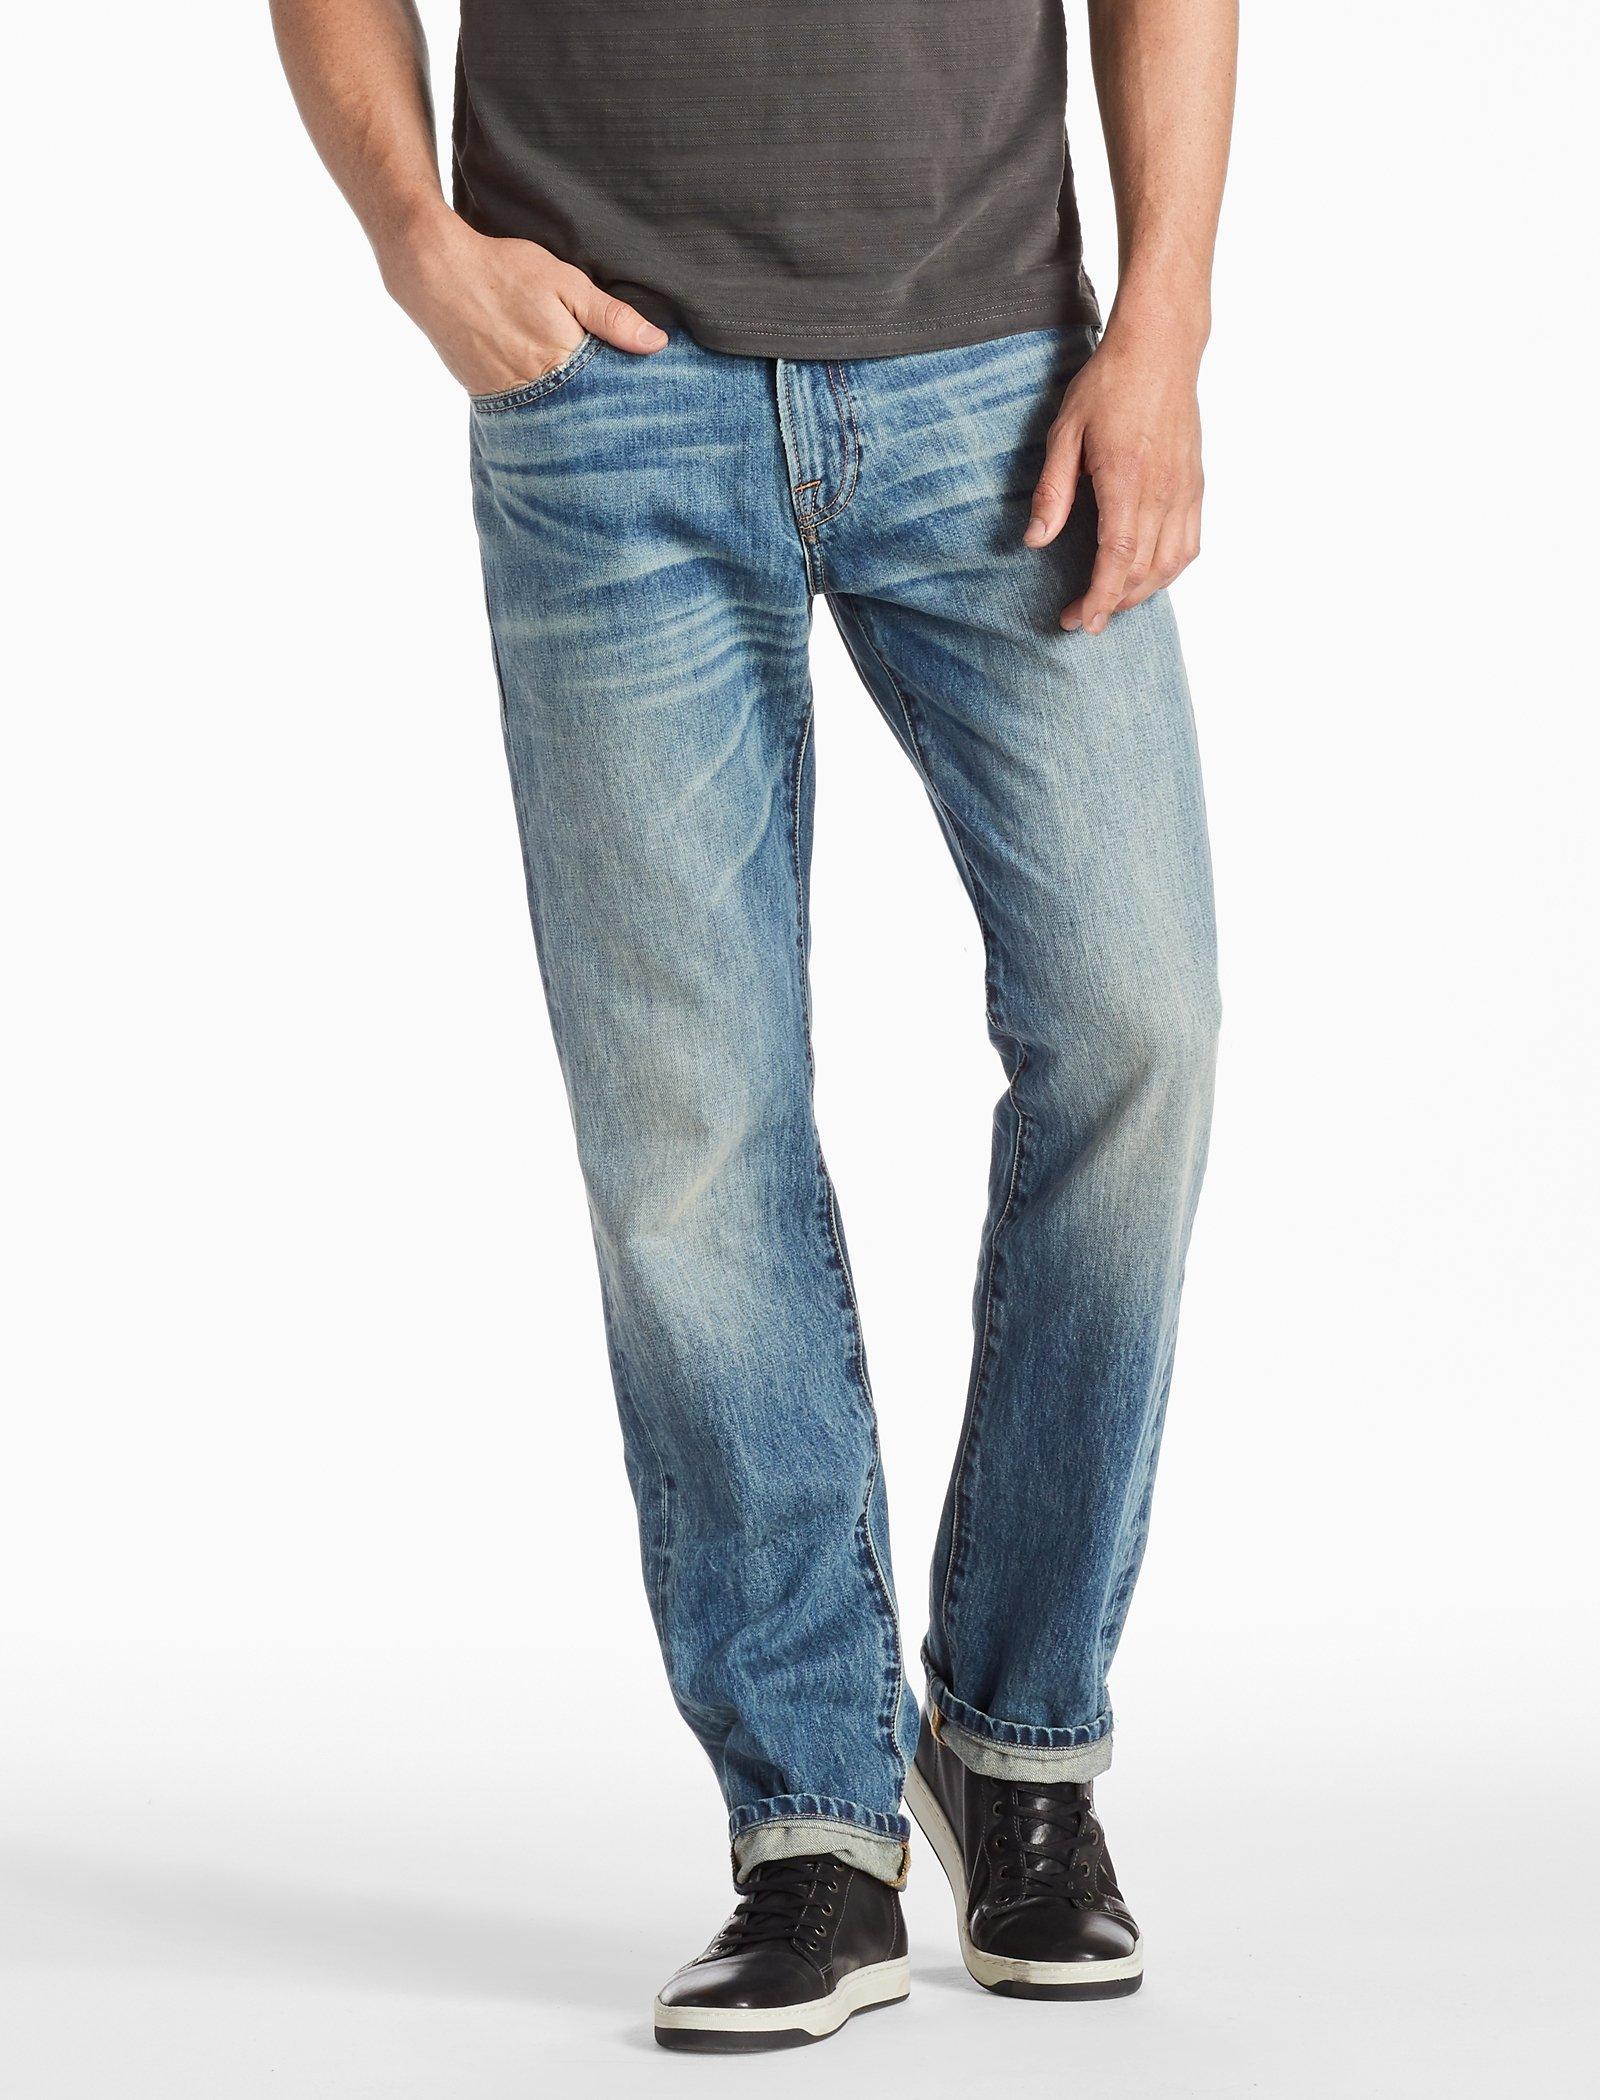 lucky brand men's 221 original straight fit jeans